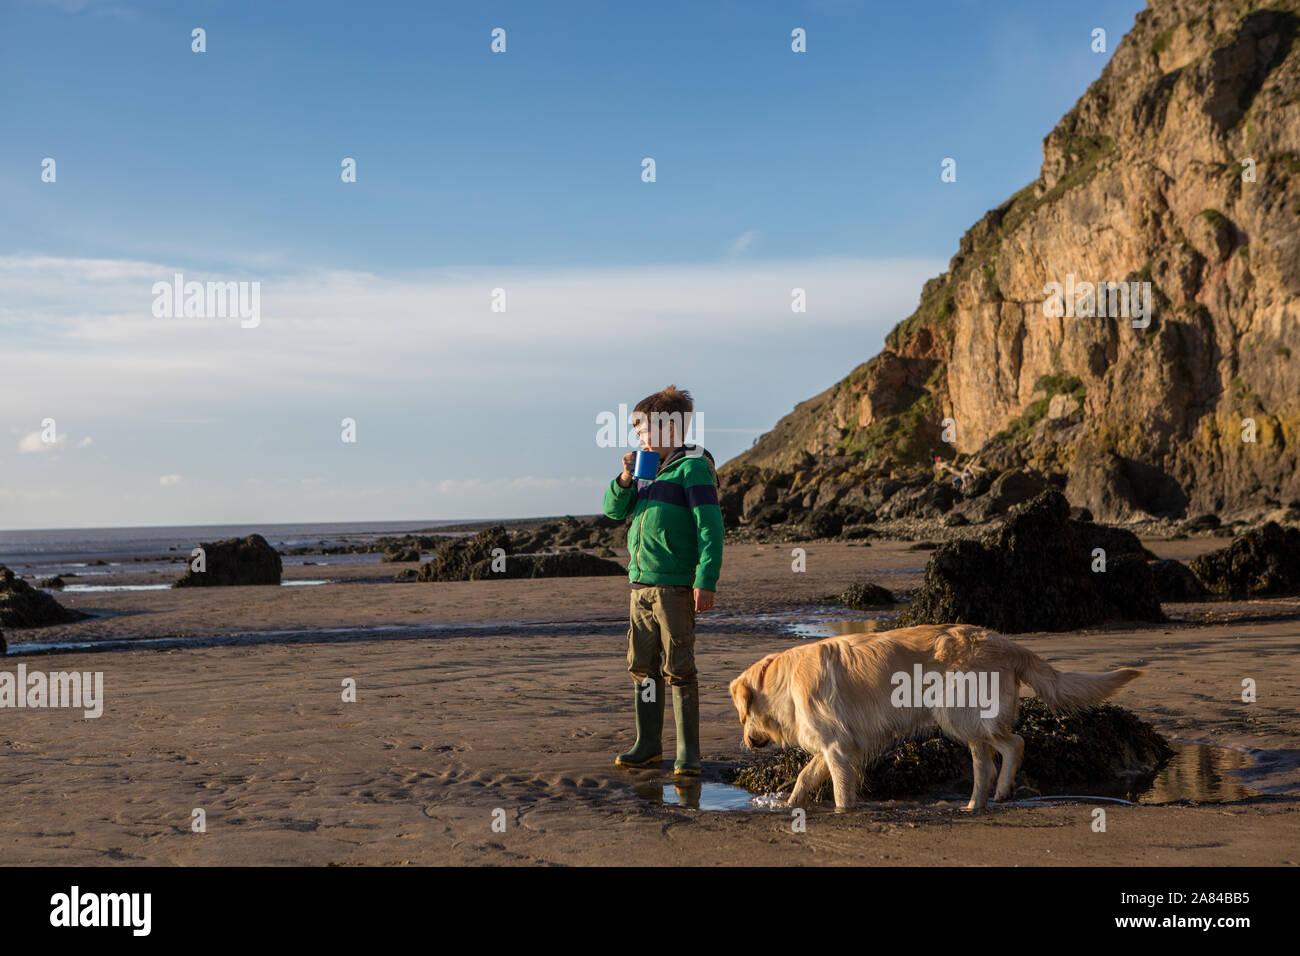 A young boy drinking hot chocolate on an empty beach, UK Stock Photo